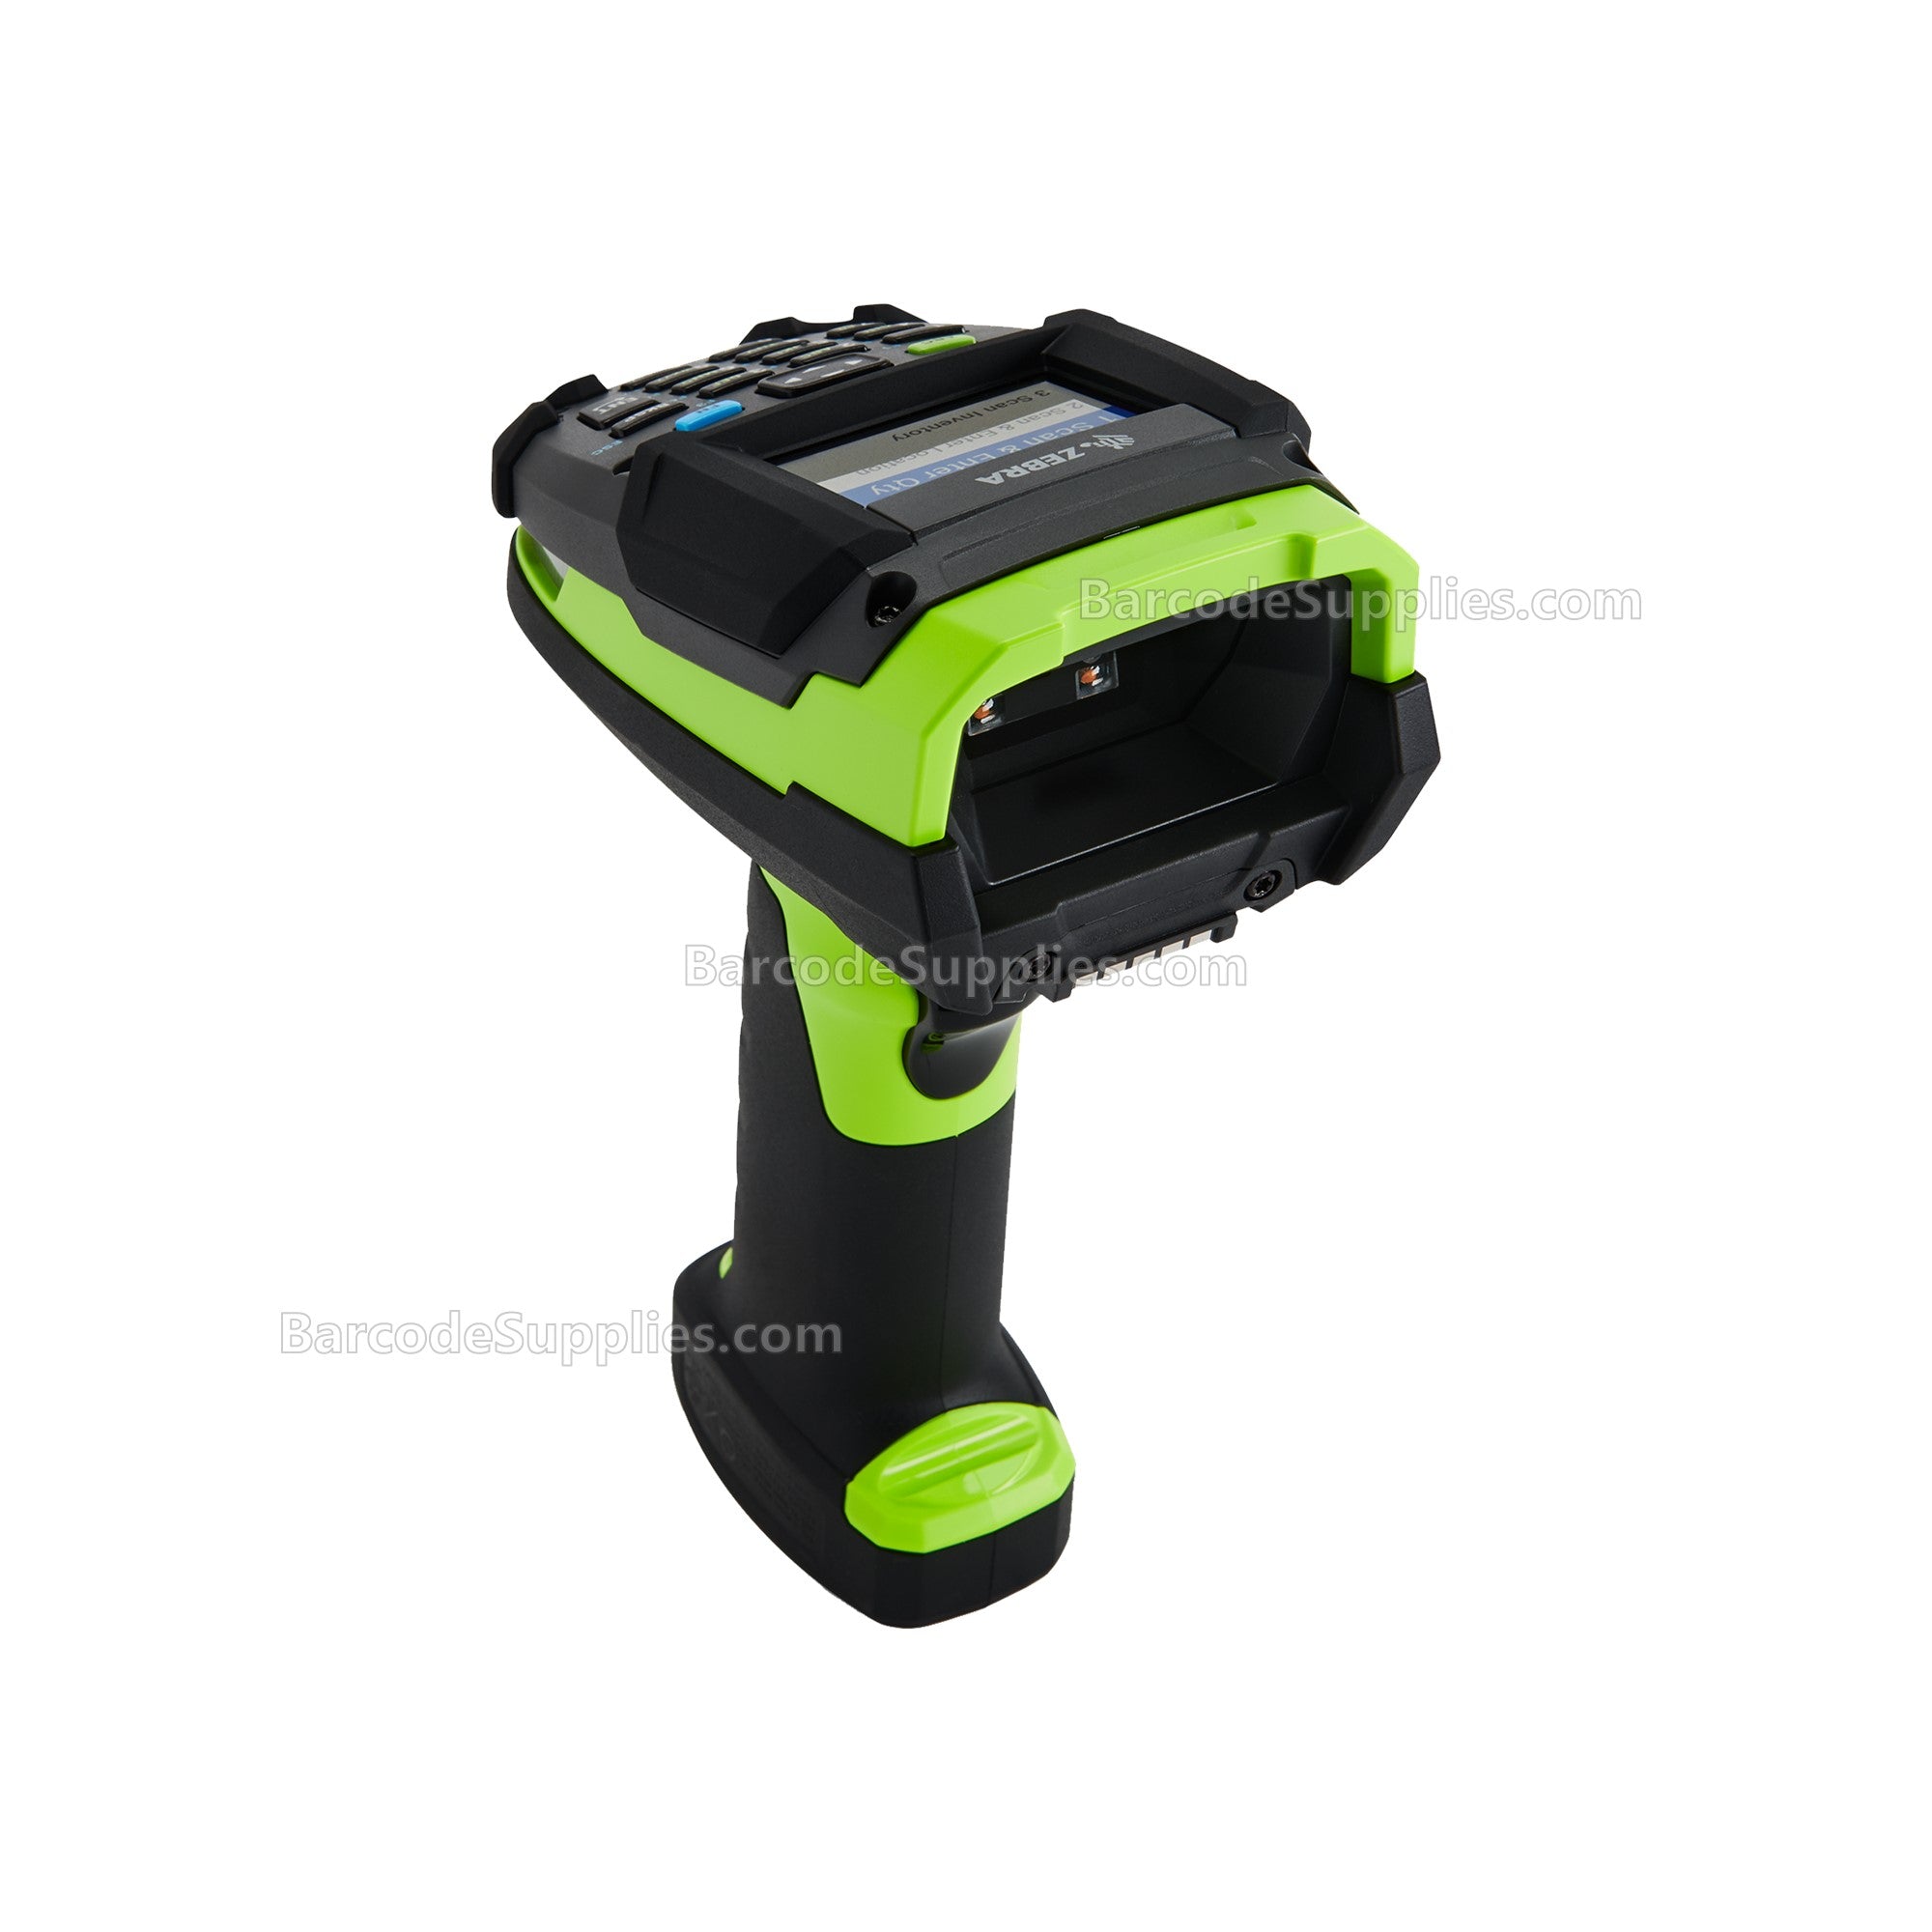 Zebra DS3678: Keypad and Display, Rugged, Area Imager, High Performance, Cordless, FIPS, Industrial Green, Vibration